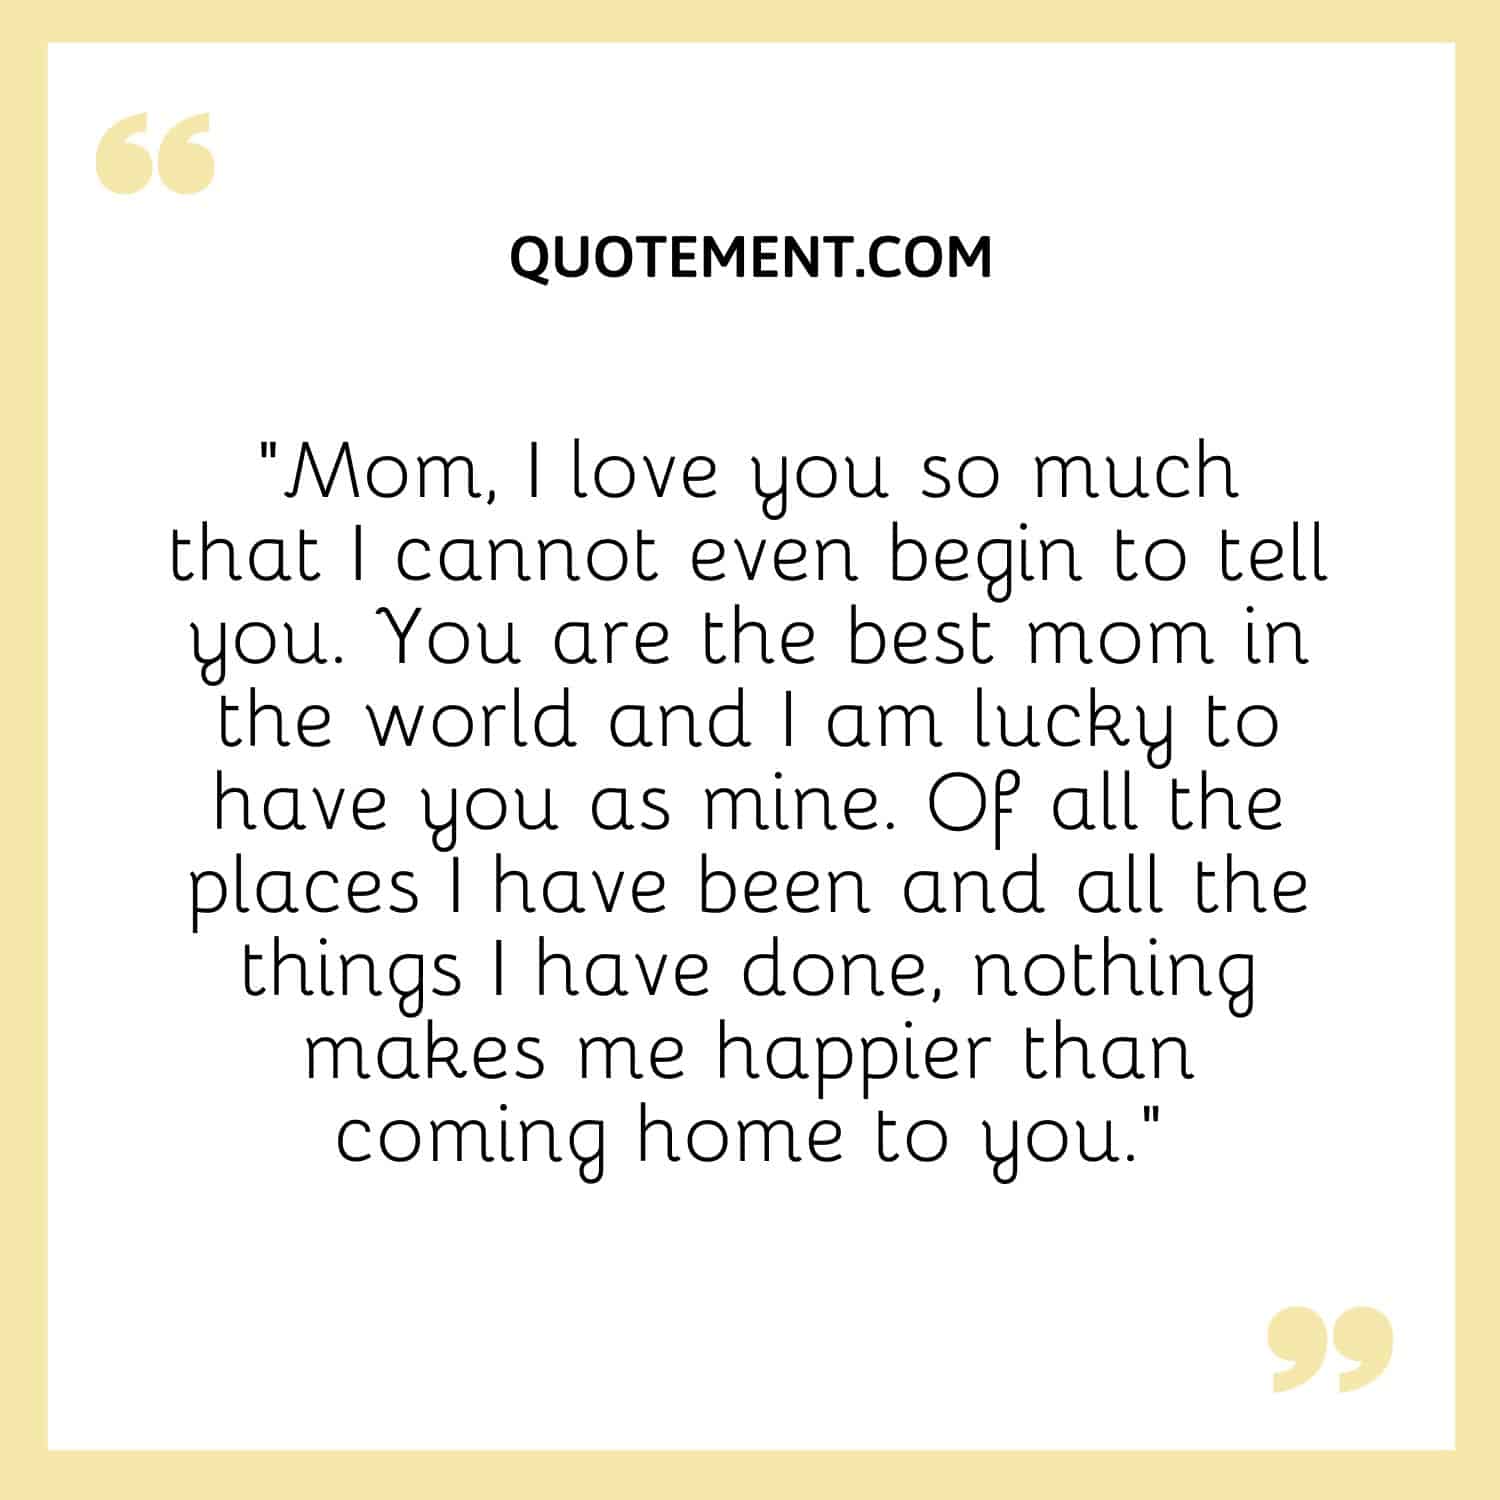 Mom, I love you so much that I cannot even begin to tell you